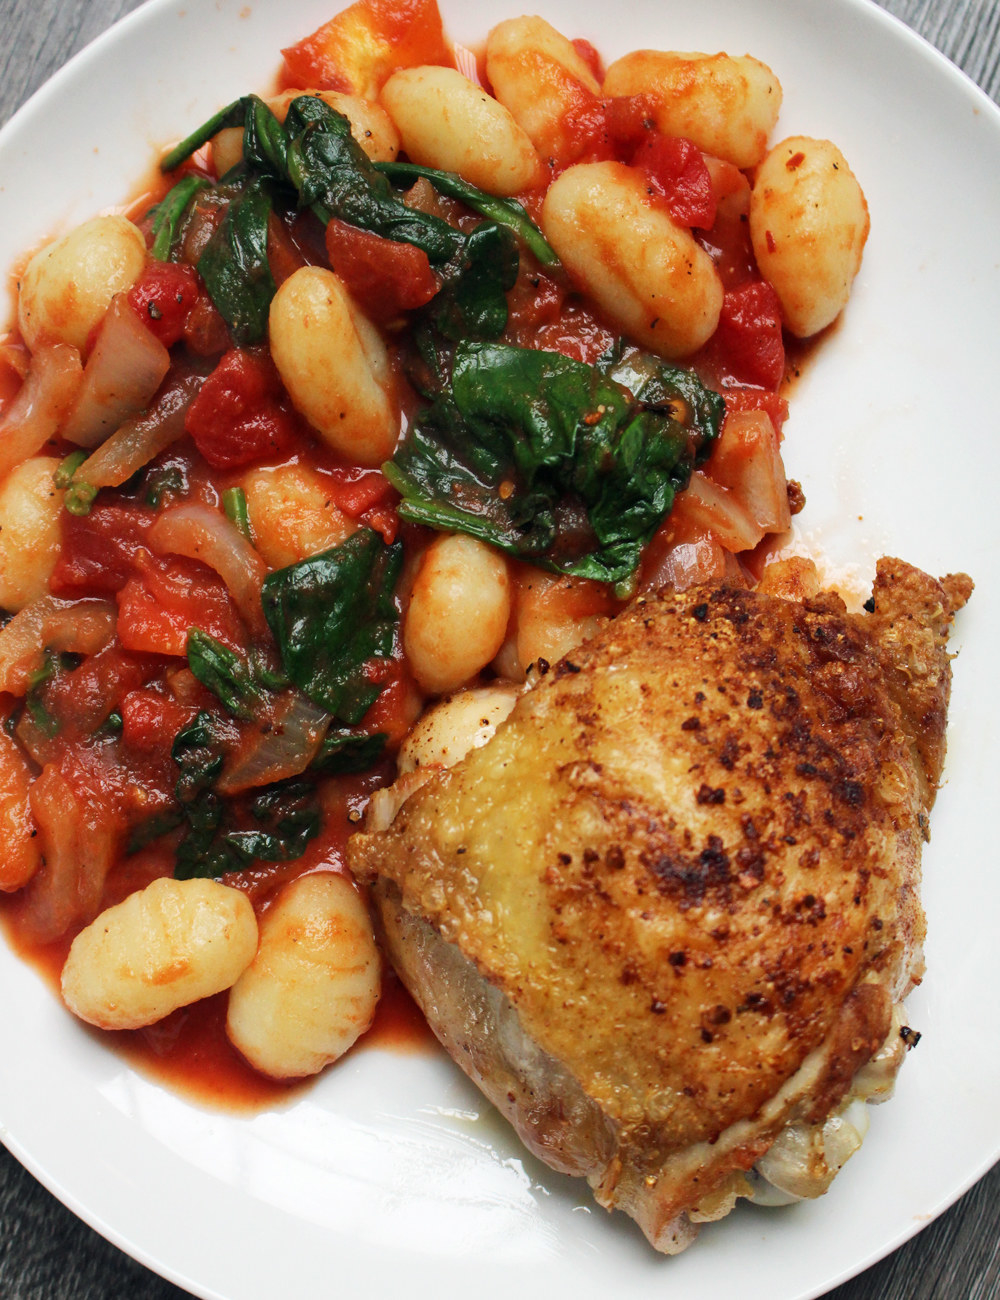 A plate of chicken and gnocchi.